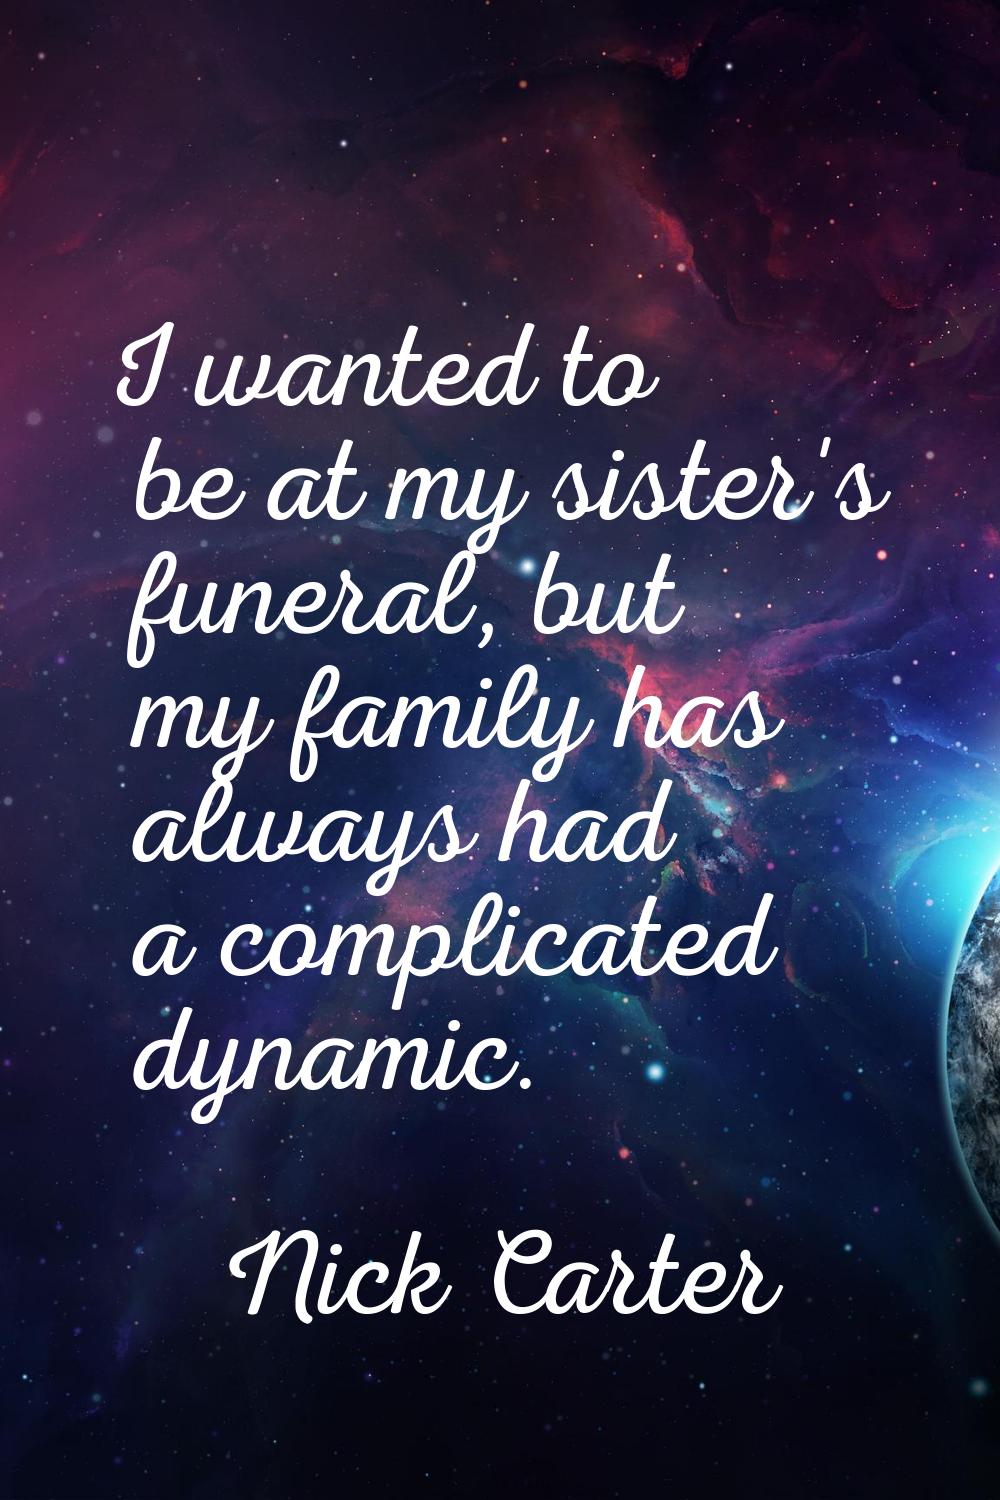 I wanted to be at my sister's funeral, but my family has always had a complicated dynamic.